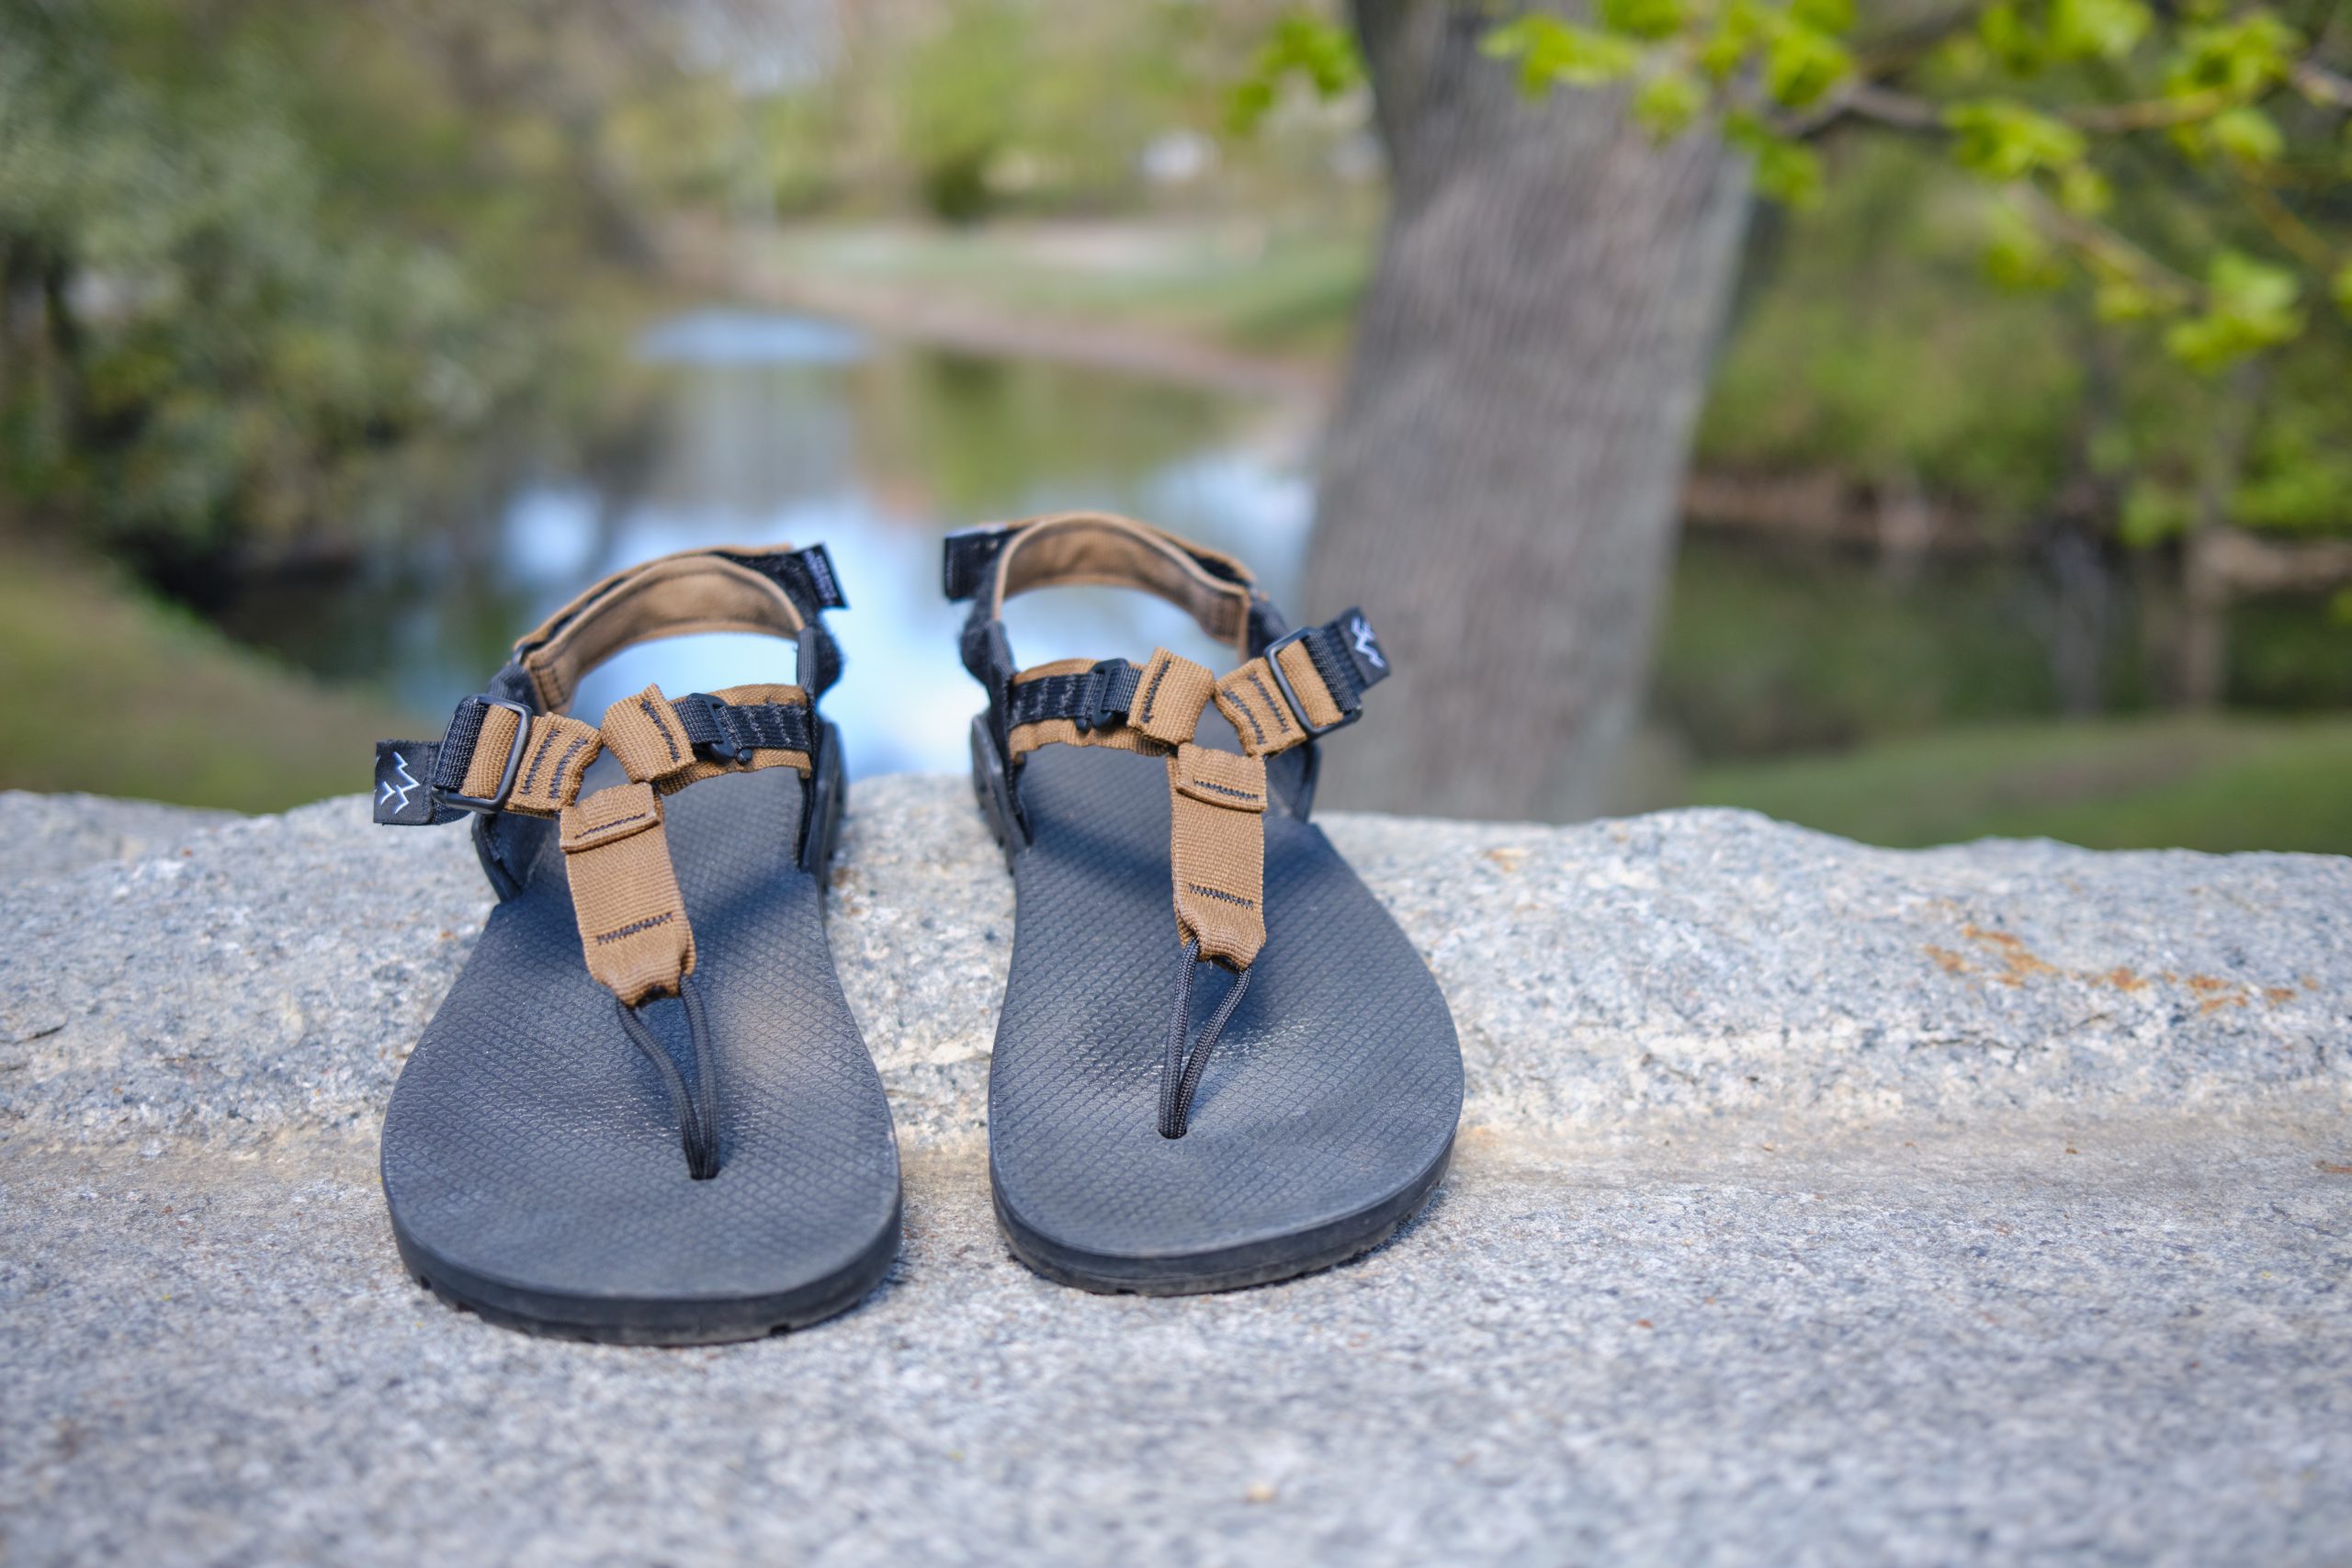 Bedrock Cairn Adventure Sandal Review - Birthday Shoes - Toe Shoes 